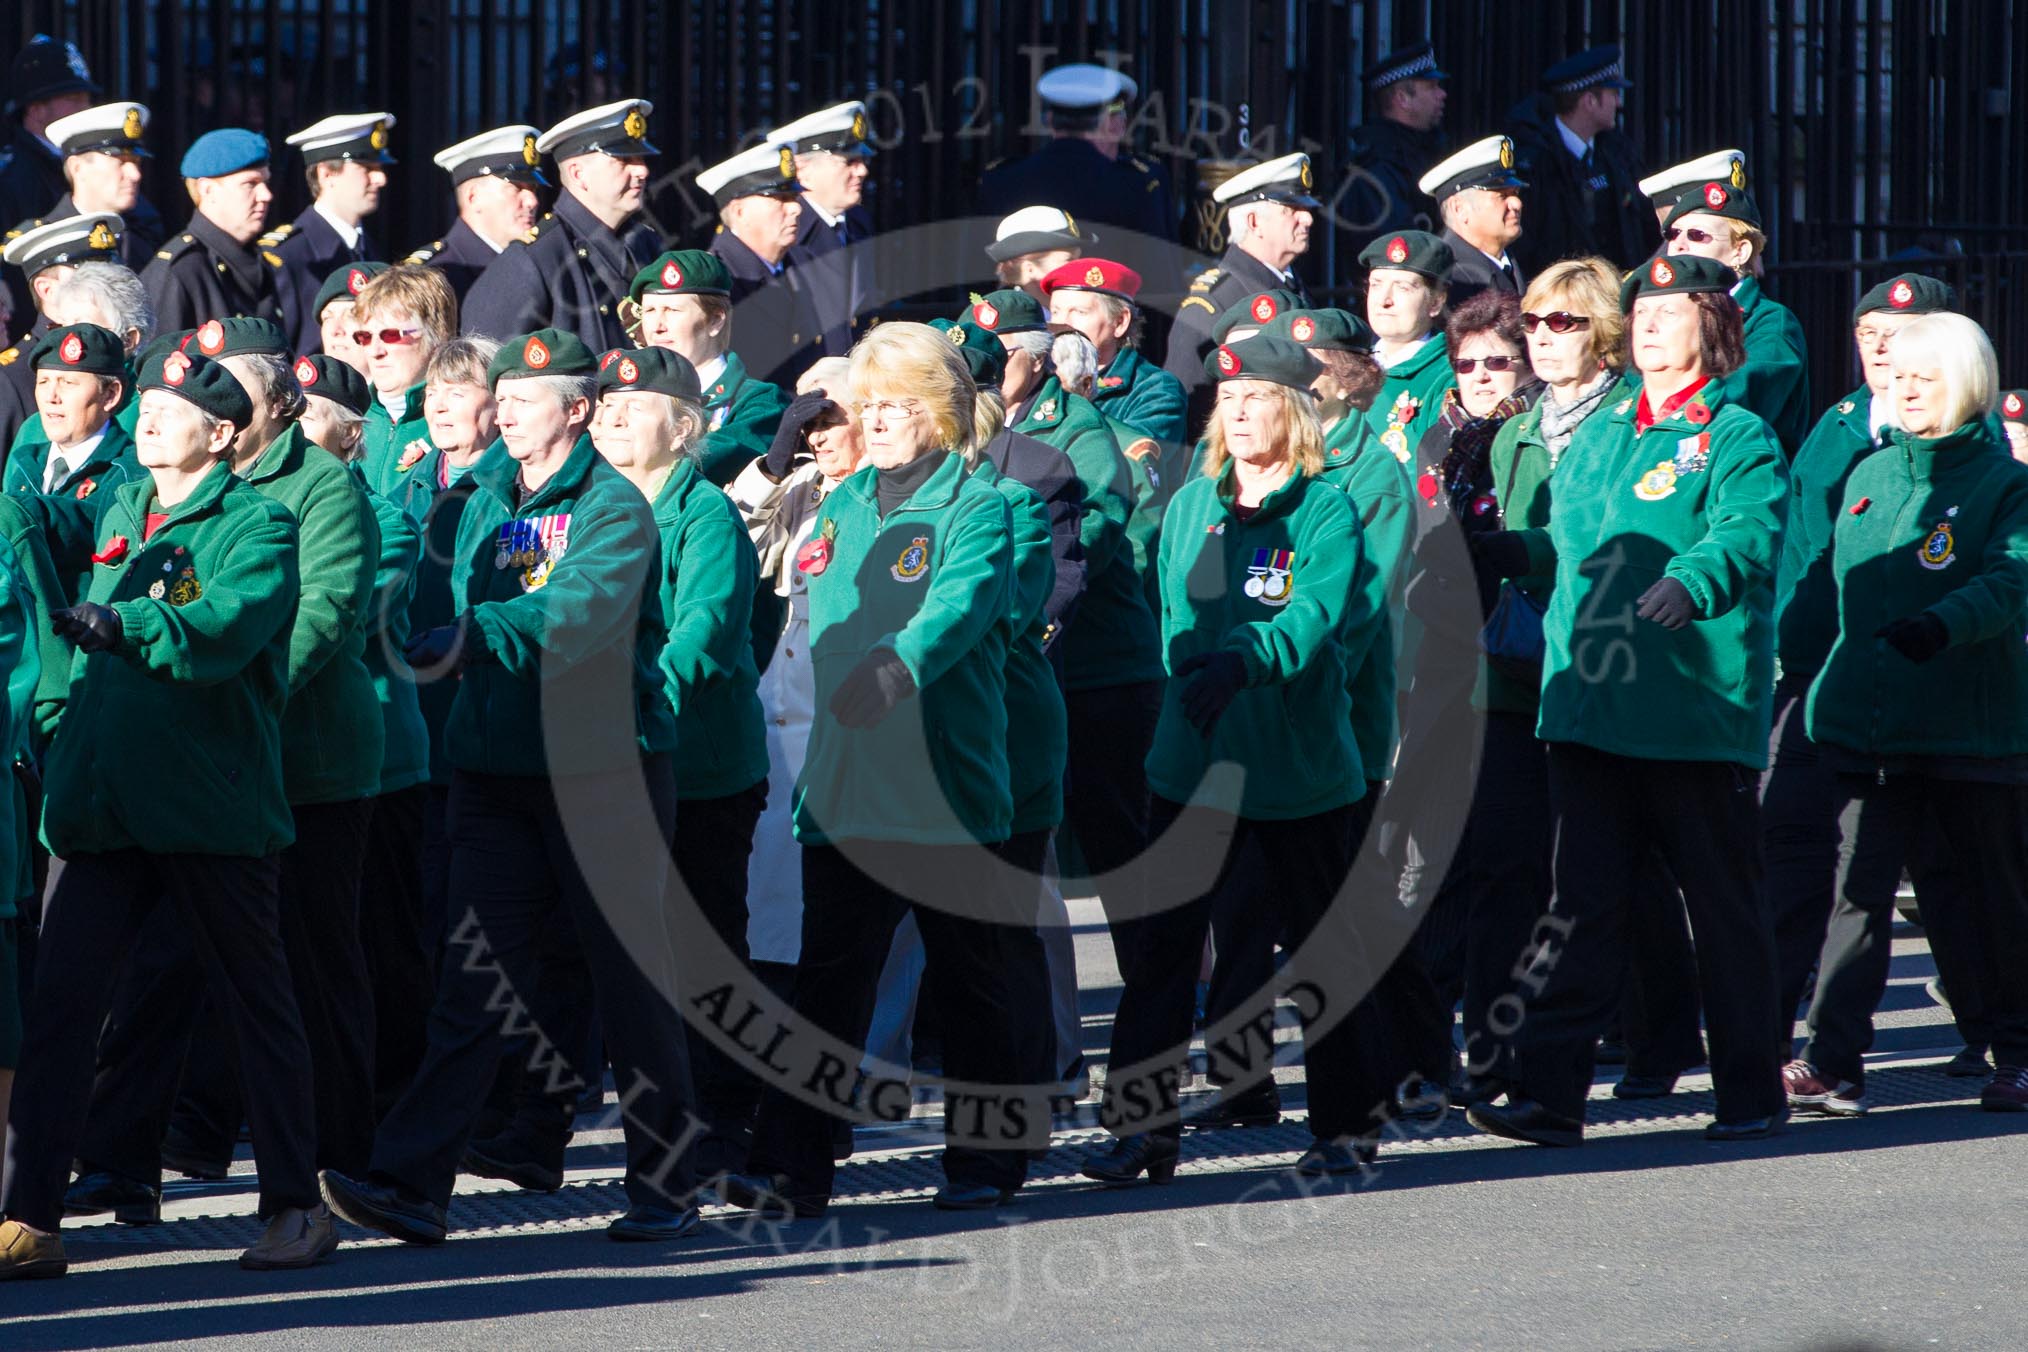 Remembrance Sunday 2012 Cenotaph March Past: Group B21 - Women's Royal Army Corps Association..
Whitehall, Cenotaph,
London SW1,

United Kingdom,
on 11 November 2012 at 11:57, image #950